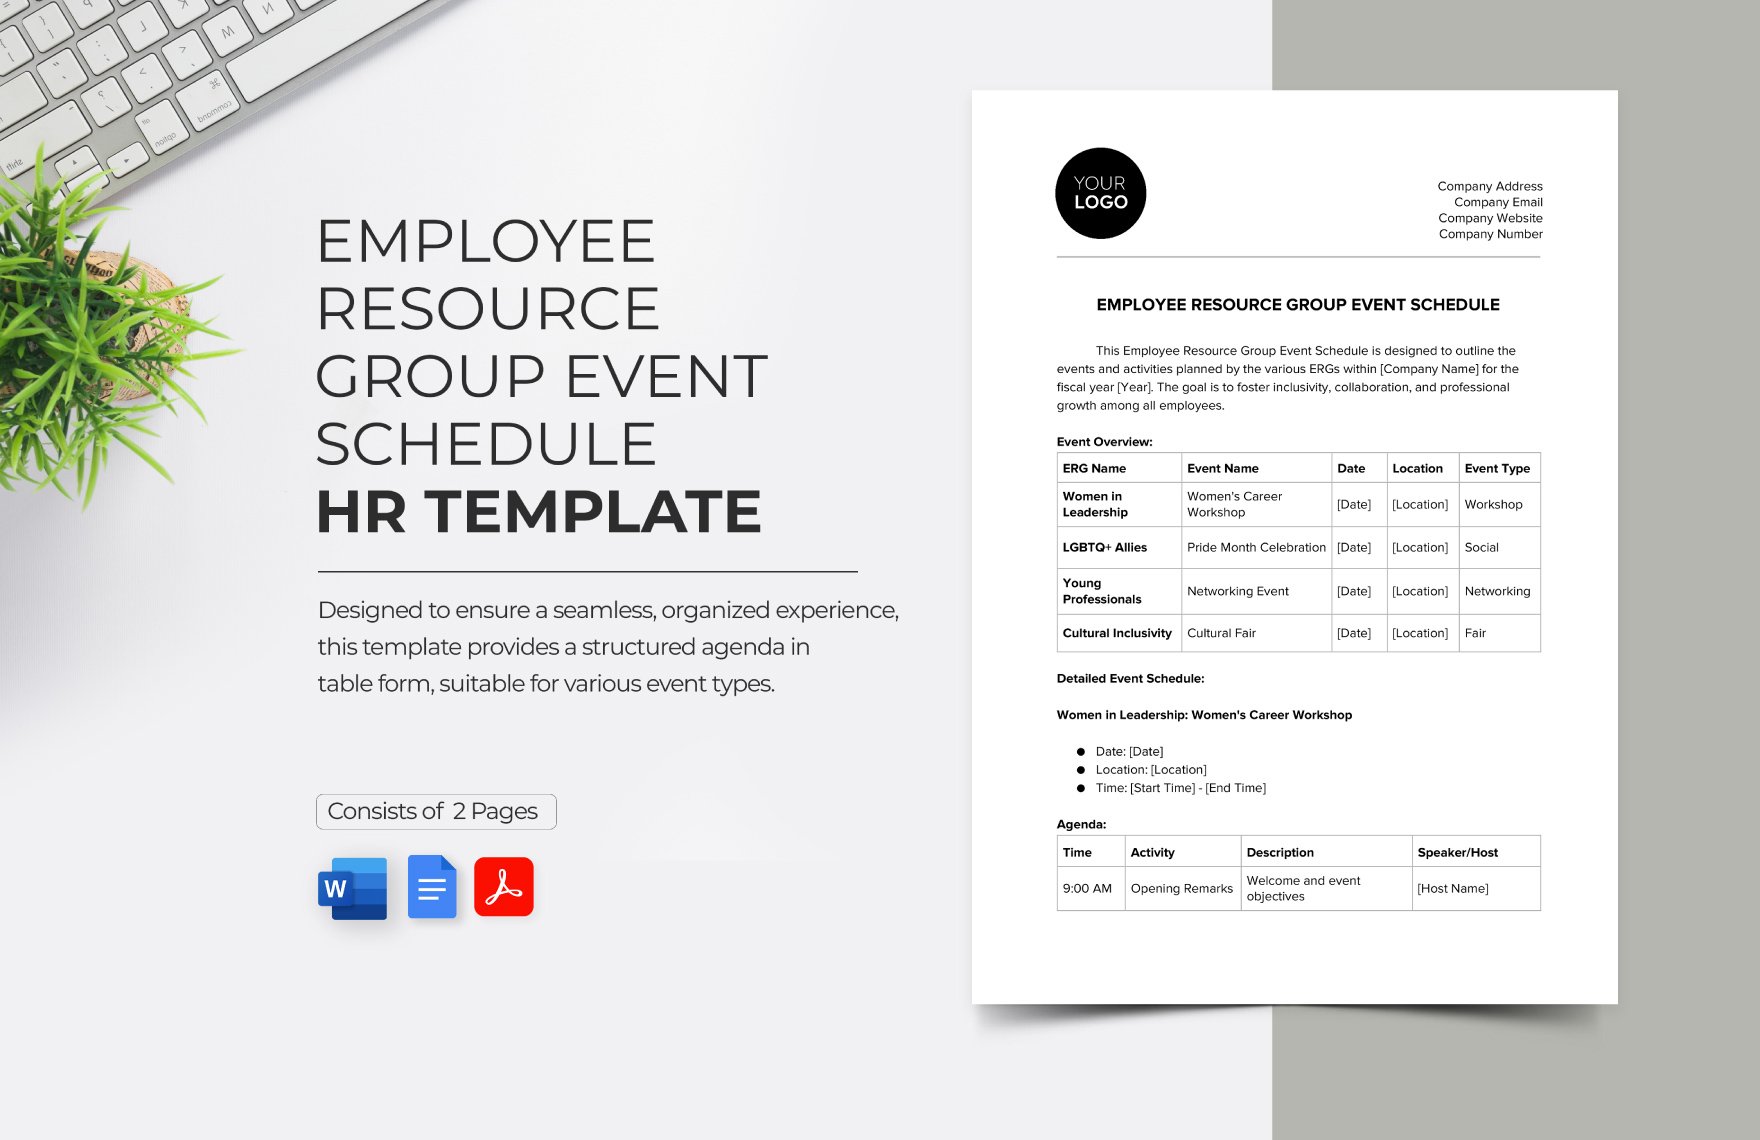 Employee Resource Group Event Schedule HR Template in Word, Google Docs, PDF